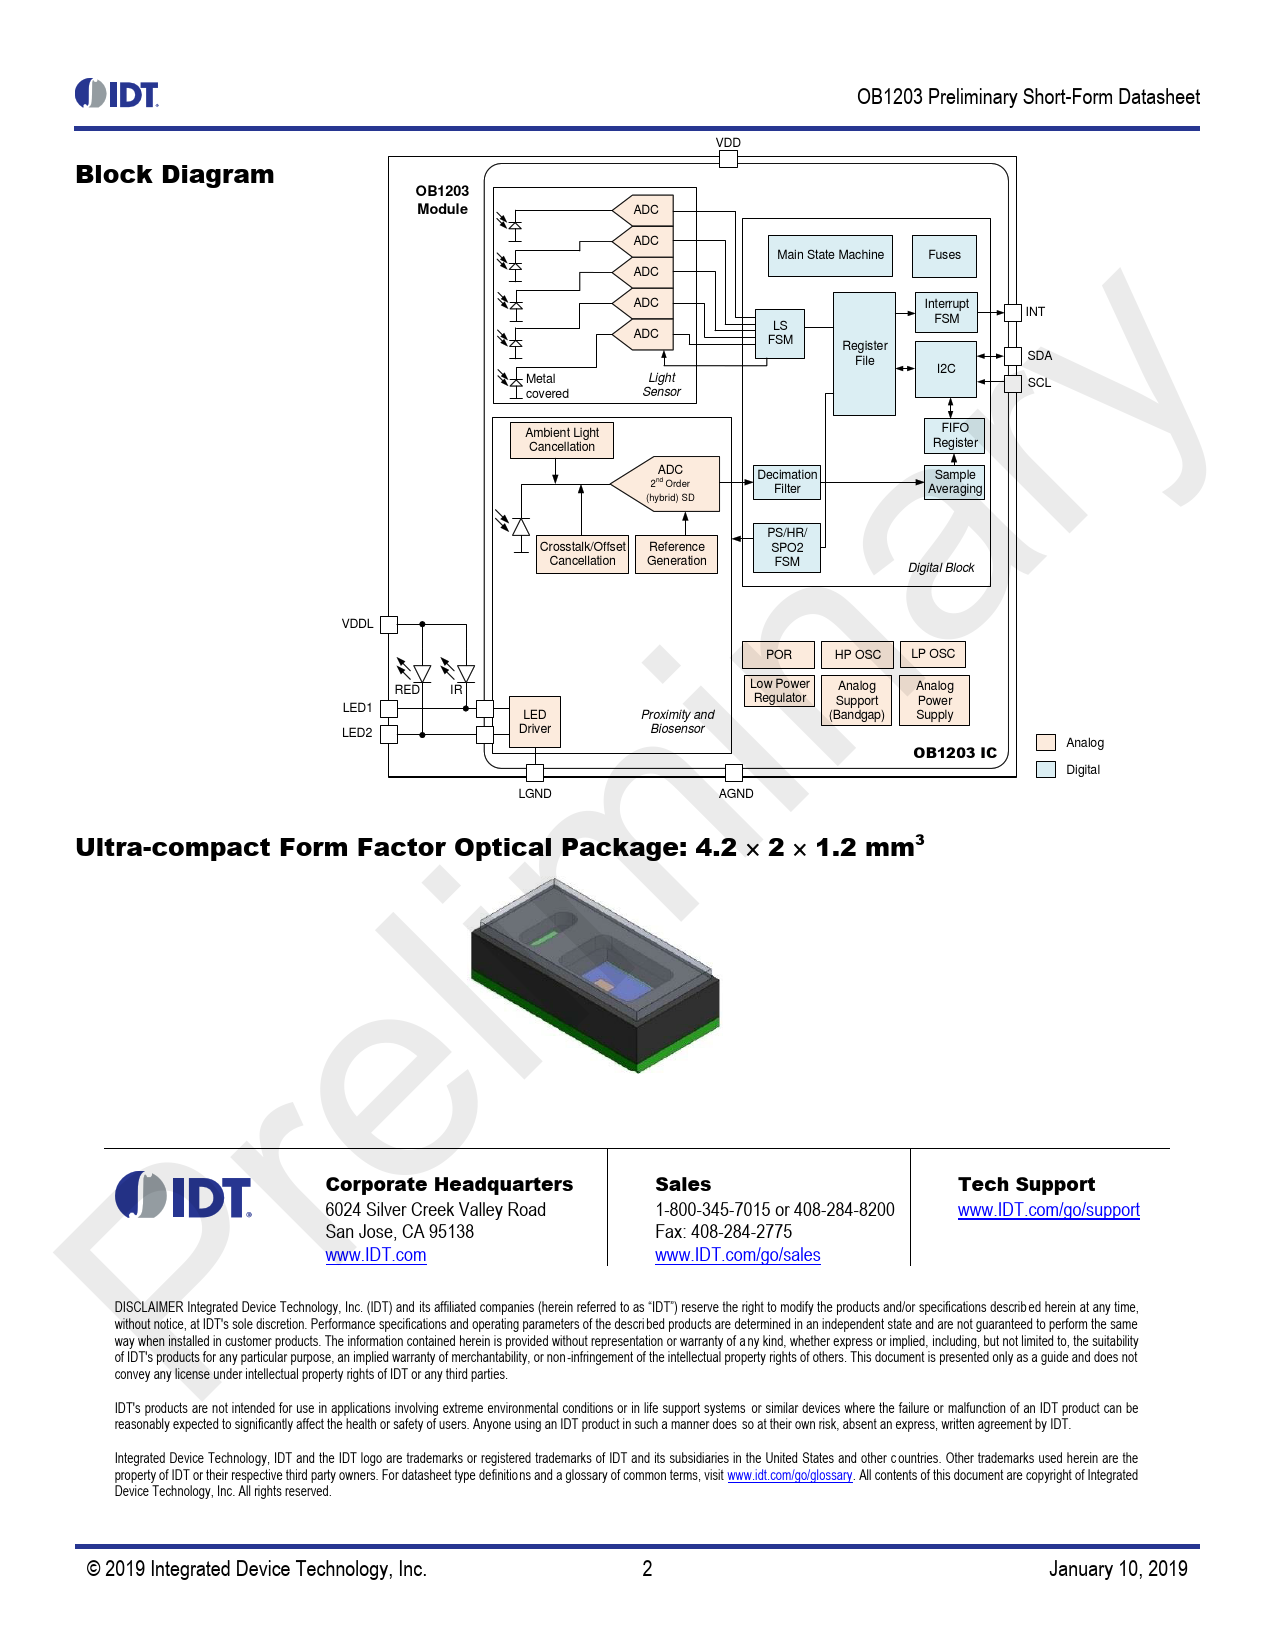 Block Diagram OB1203 Module OB1203 IC Ultra-compact Form Factor Optical Package: 4.2 1.2 mm3 Corporate Headquarters Sales